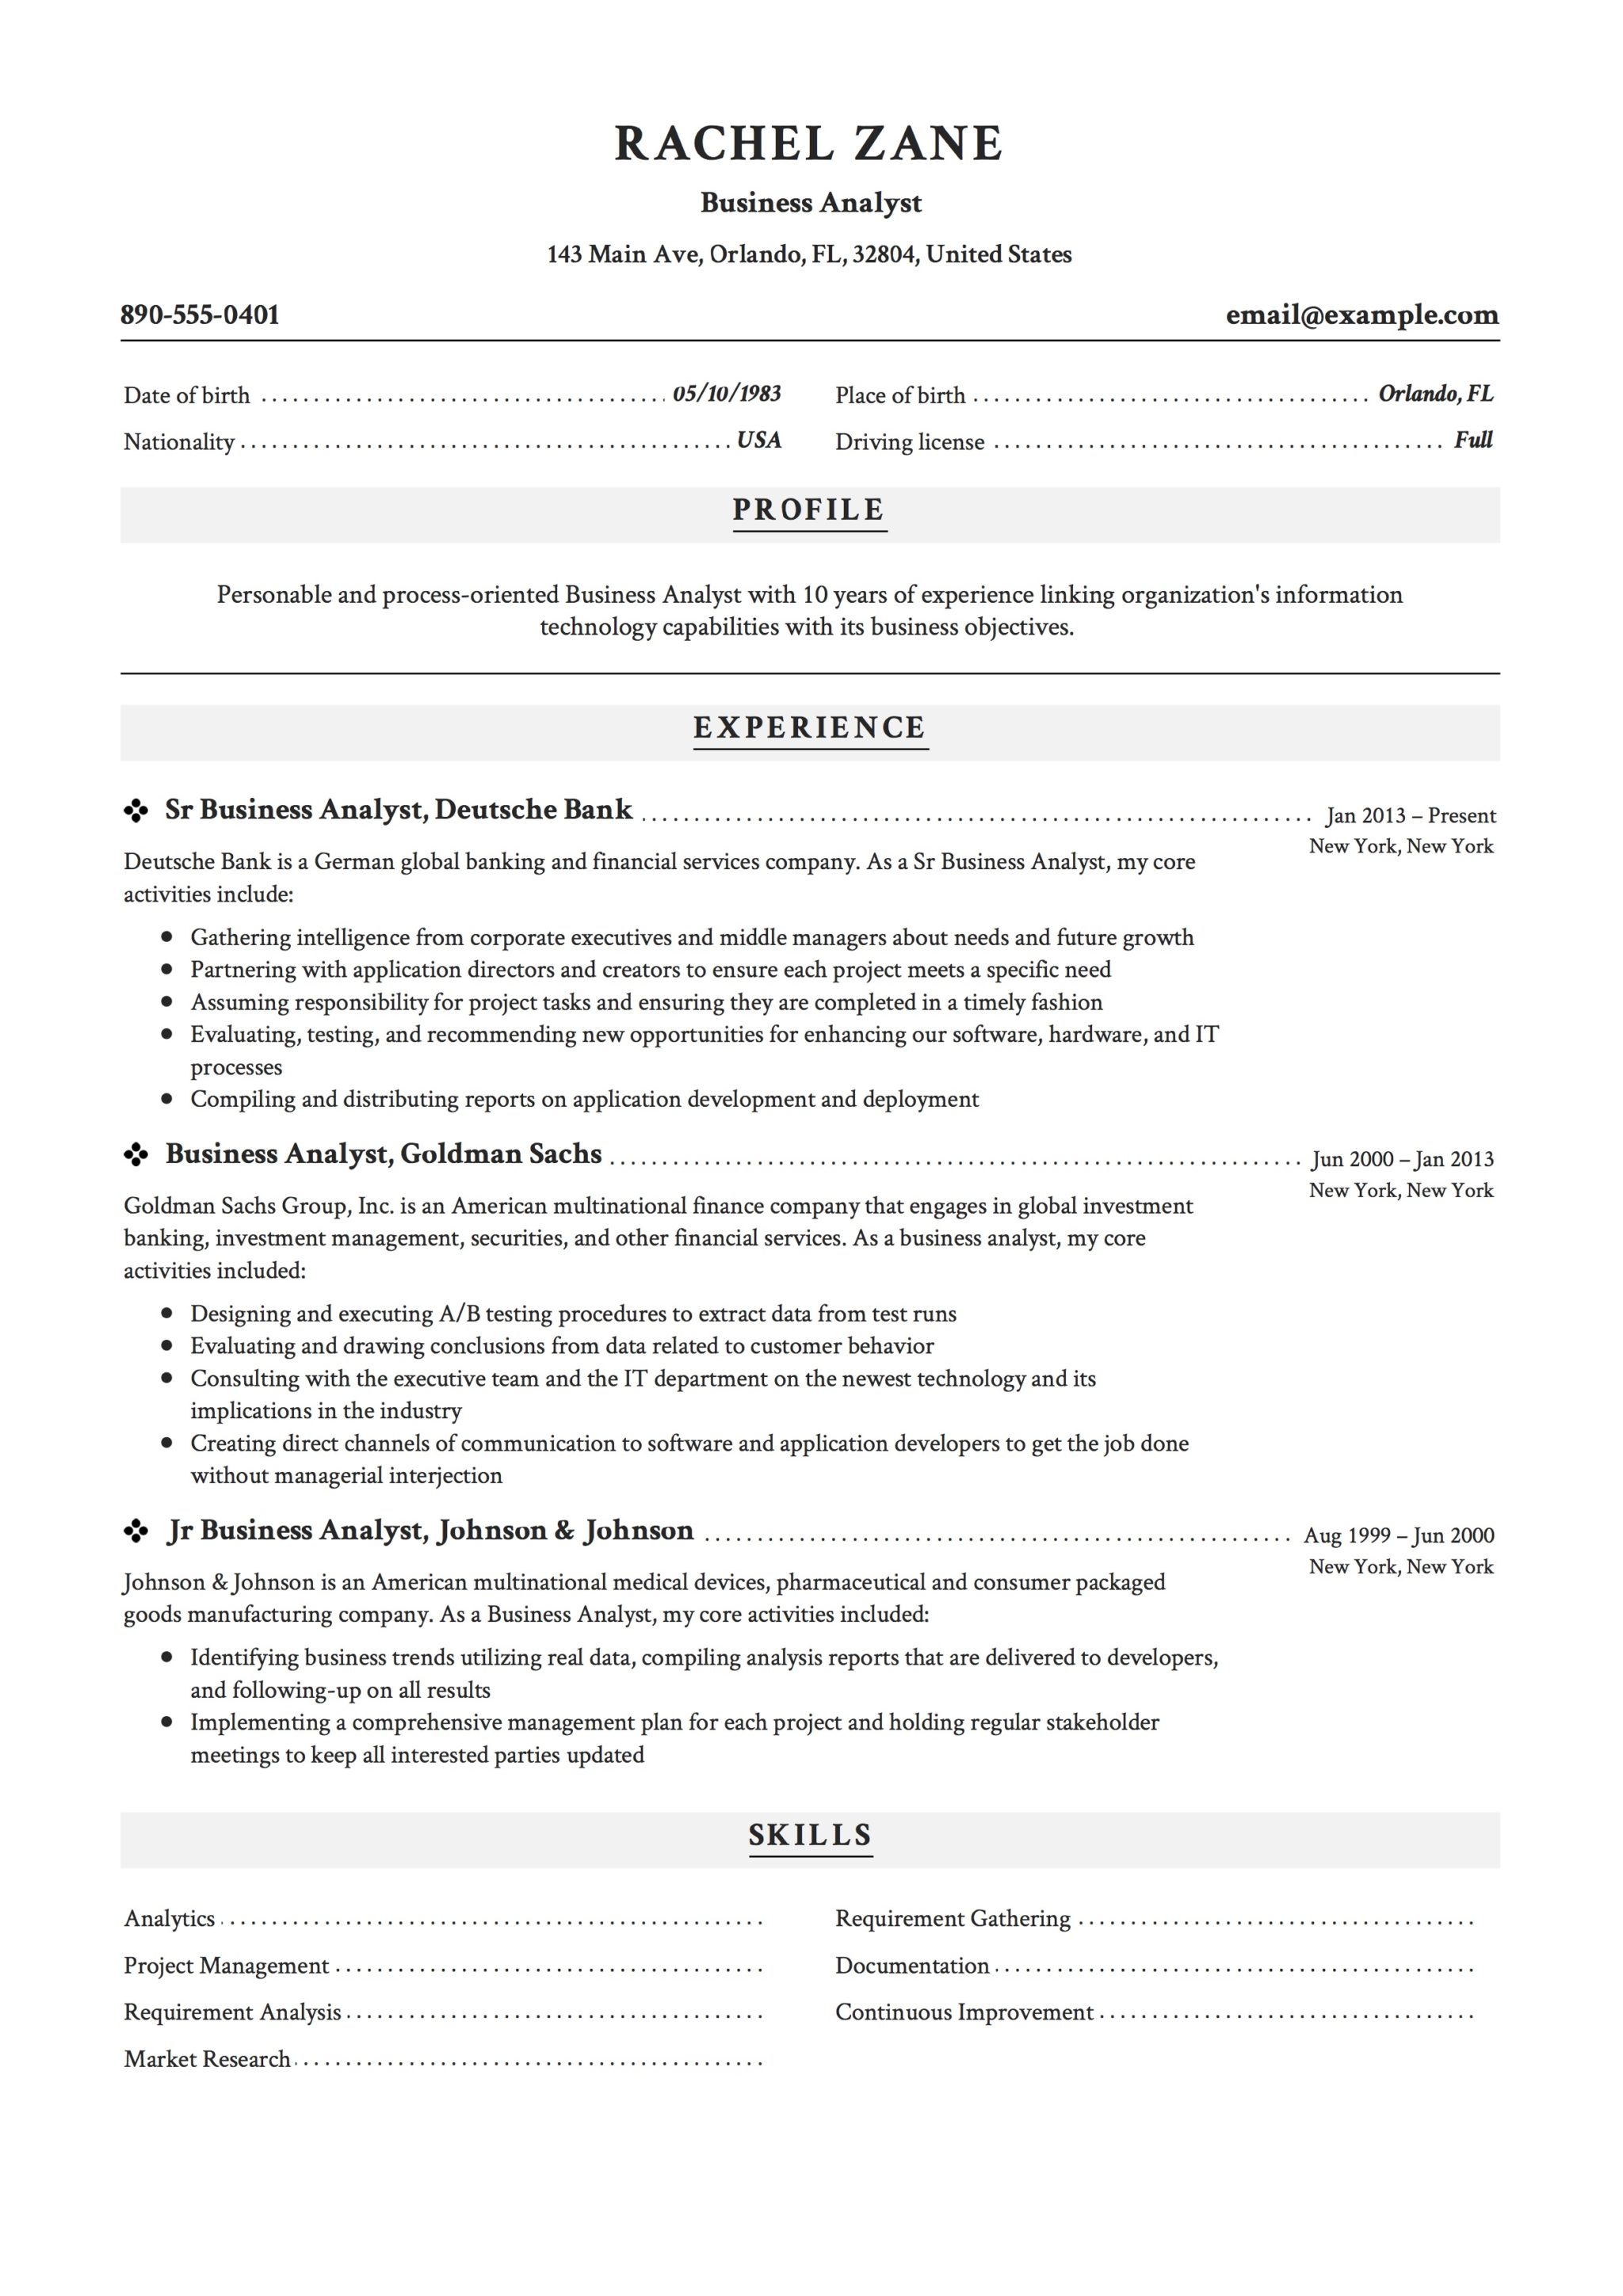 Professional Resume Example Business Analyst